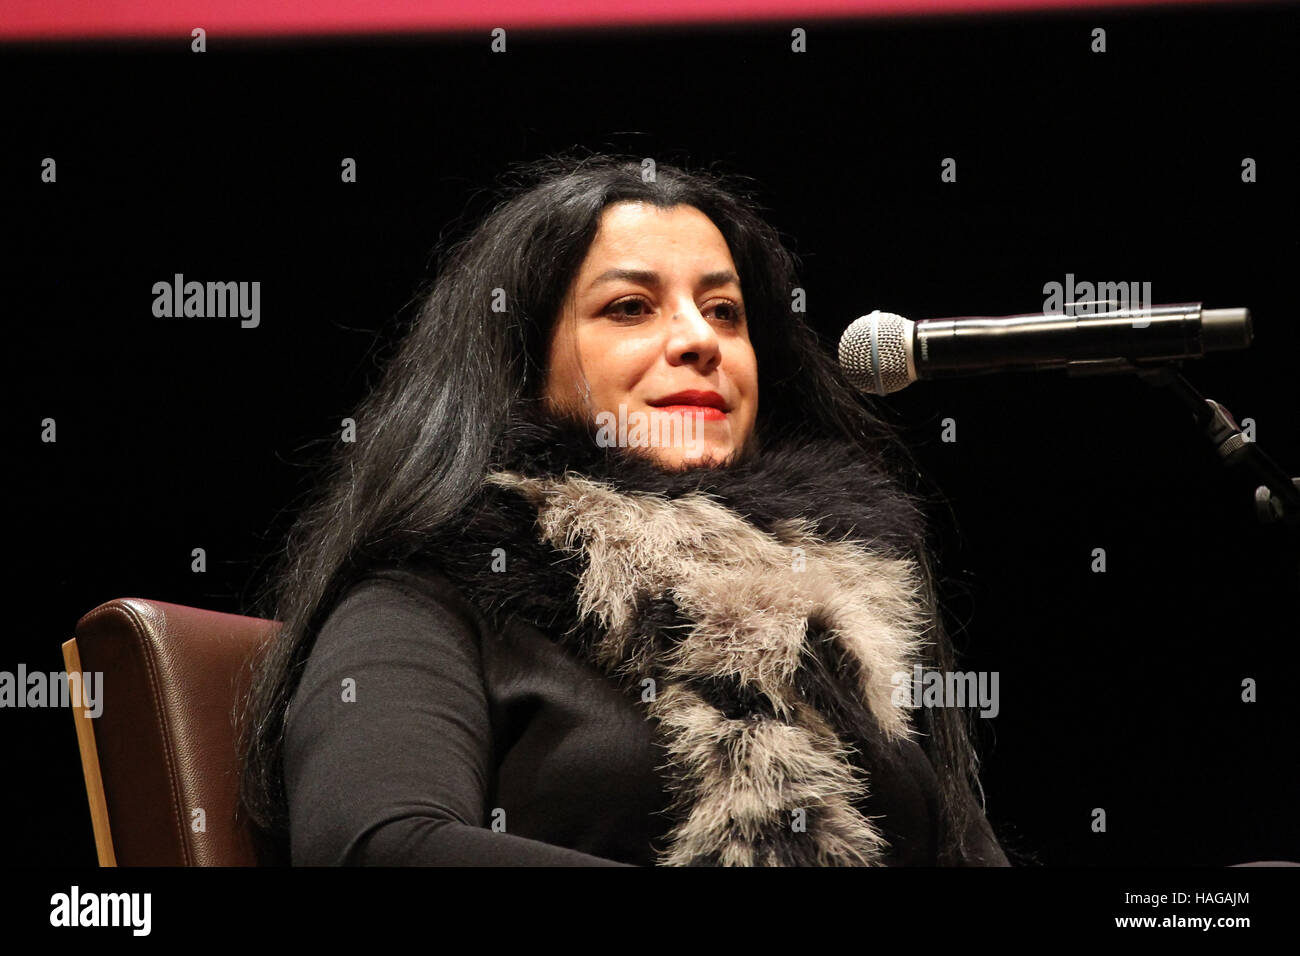 Athens, Greece. 30th Nov, 2016. Marjane Satrapi for a conversation with the Greek audience at Onassis Cultural Centre. Marjane Satrapi became an international sensation when she published her memories of childhood and adolescence as a comic book, which has now been translated into over forty languages. Persepolis tells the story of a super-bright girl growing up in Iran in the 1970s as the Islamic Revolution and the Iran-Iraq war impact on the life of her family and turn her world upside down. © ZUMA Press, Inc./Alamy Live News Stock Photo